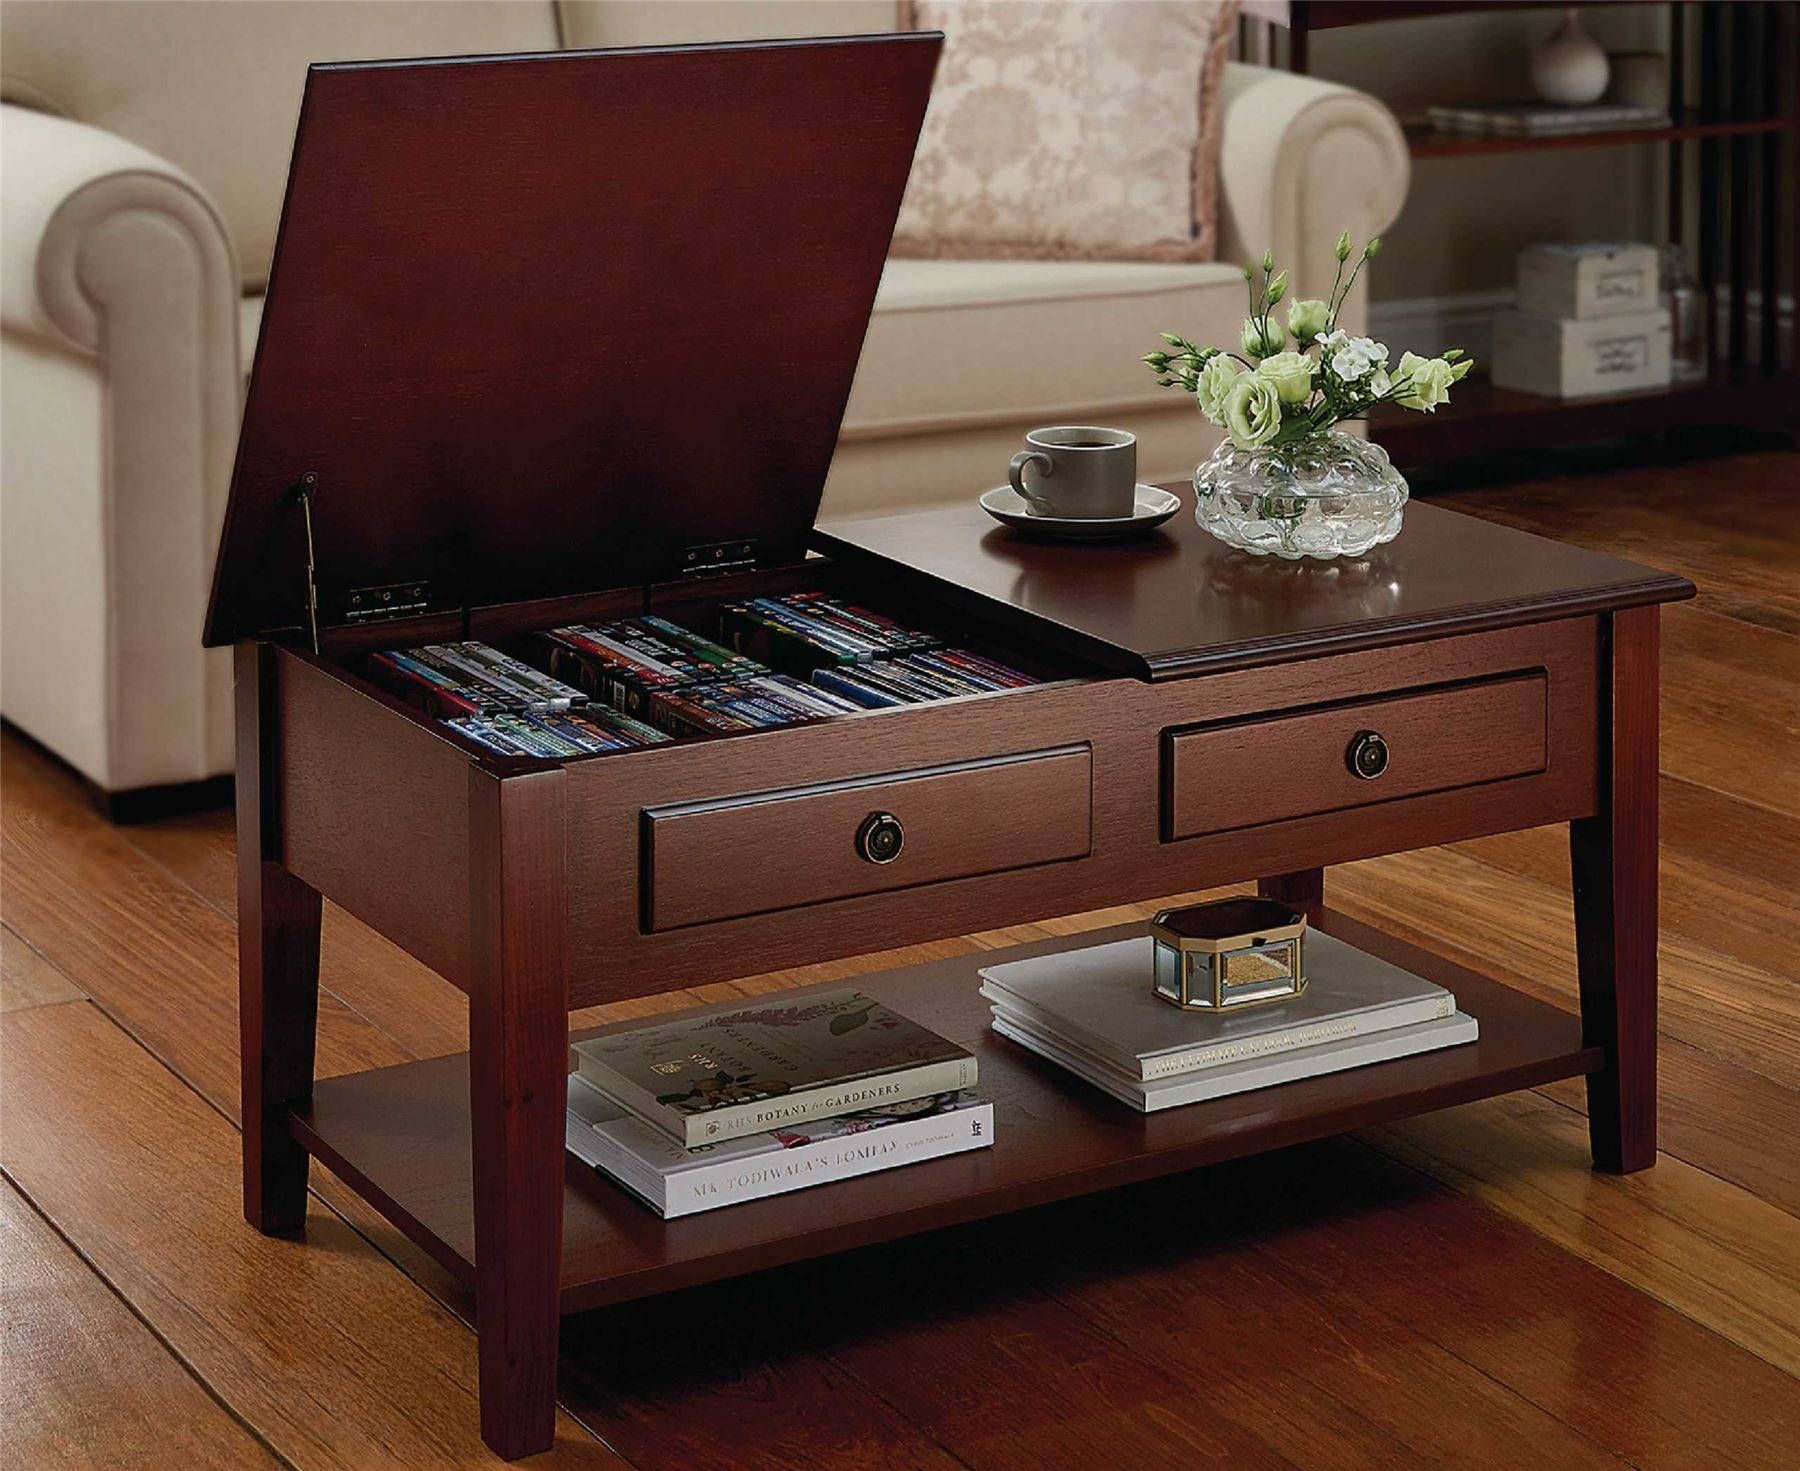 Dvd Storage Furniture Living Room – Carameloffers Within Cd Storage Coffee Tables To Copy At Home (View 2 of 30)